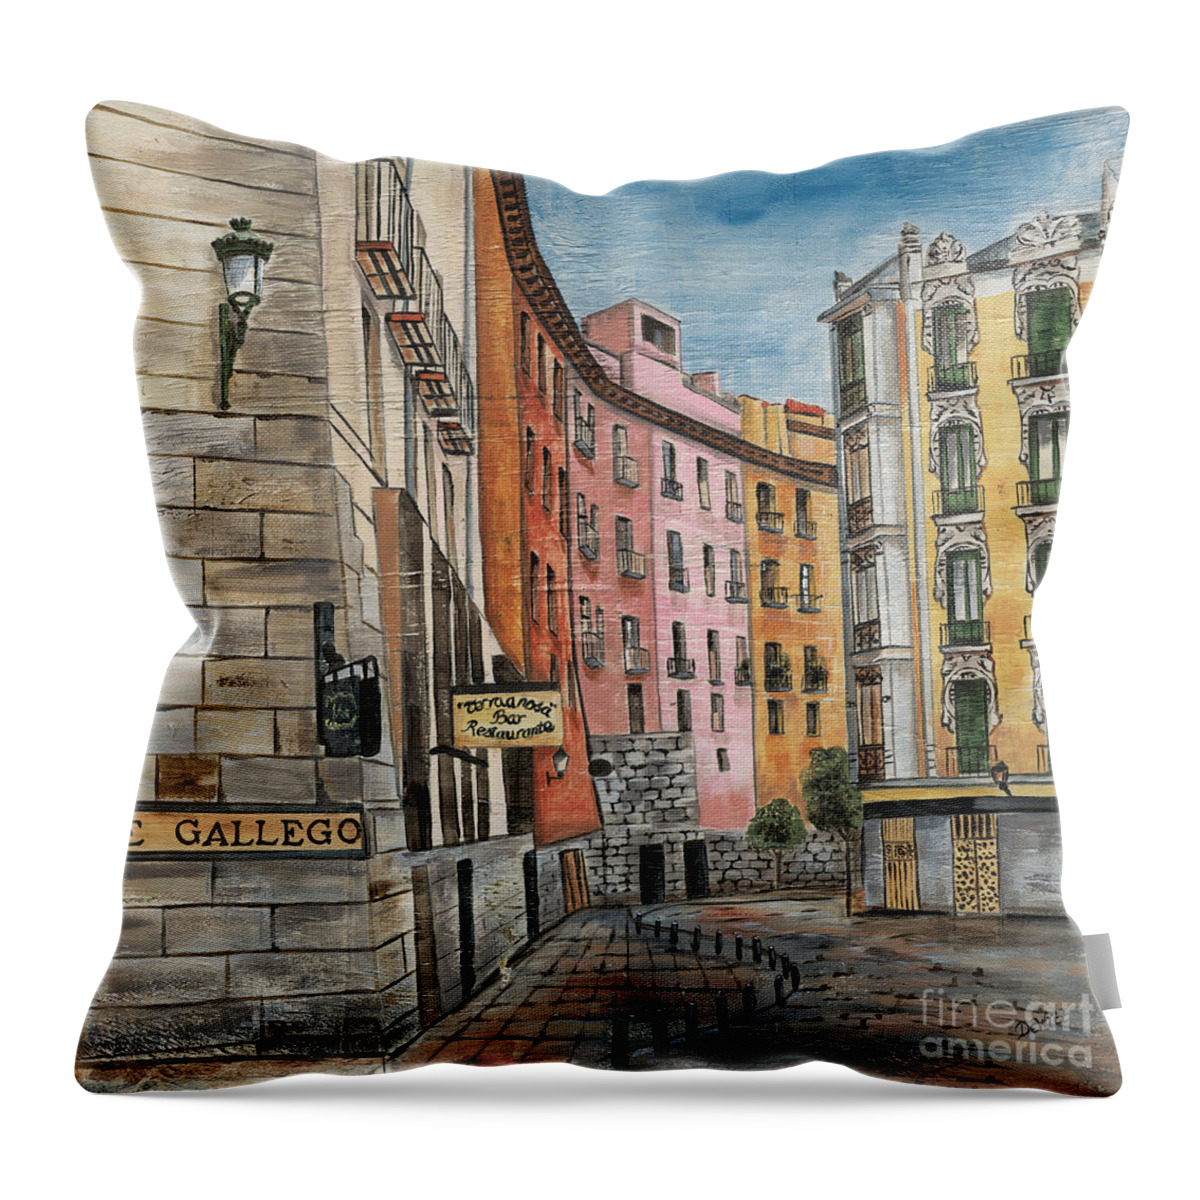 Landscape Throw Pillow featuring the painting Italian Village 2 by Debbie DeWitt